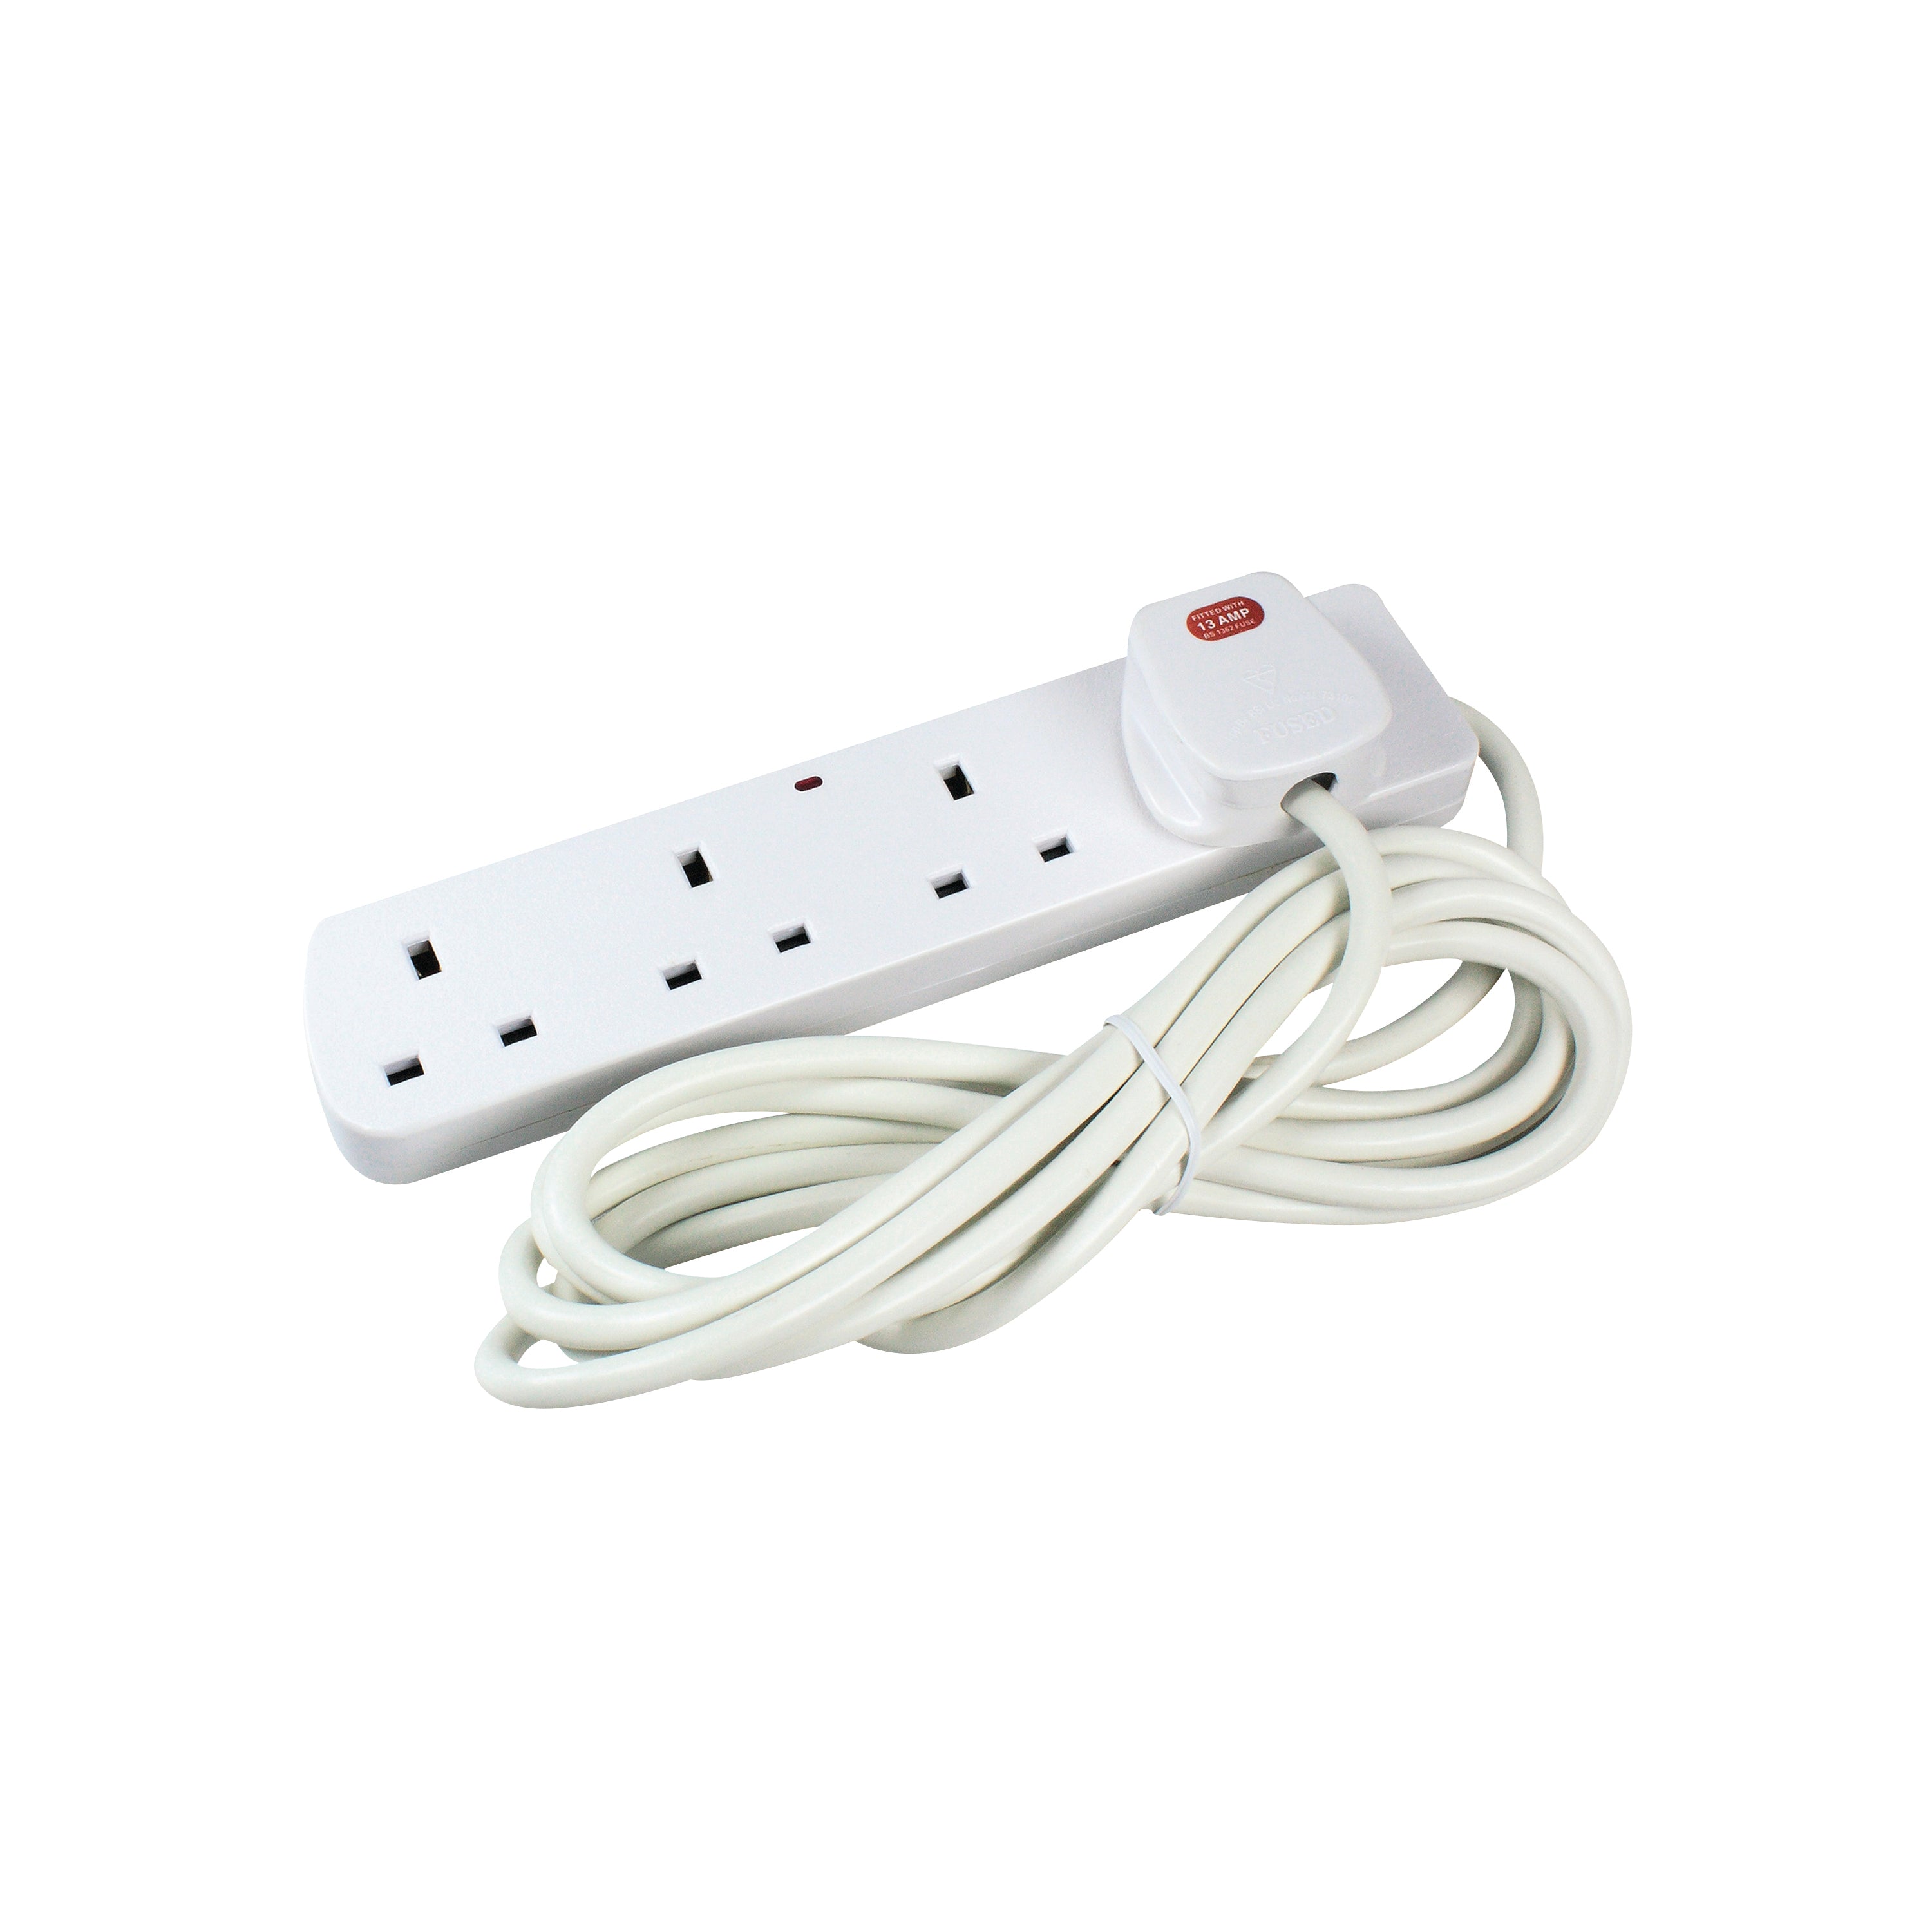 CED 4-Way 13 Amp 2m Extension Lead White with Neon Light CEDTS4213M